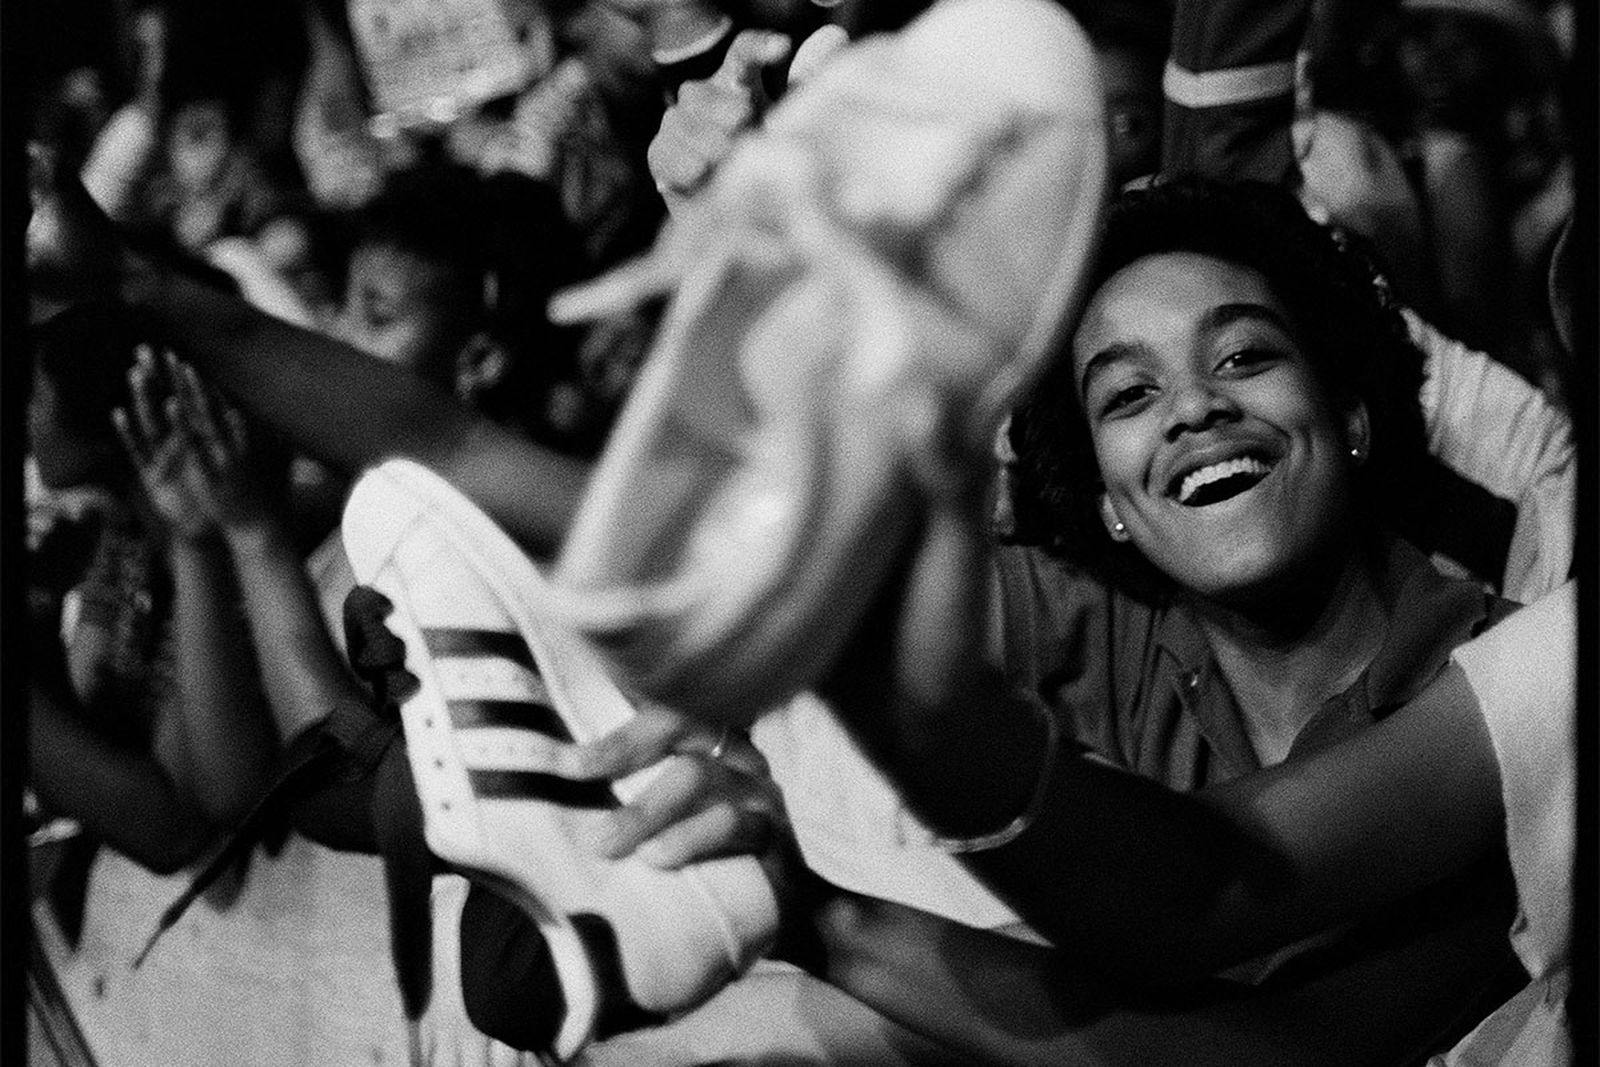 A fan proudly waves his adidas Superstars in the air at a Run-DMC concert.